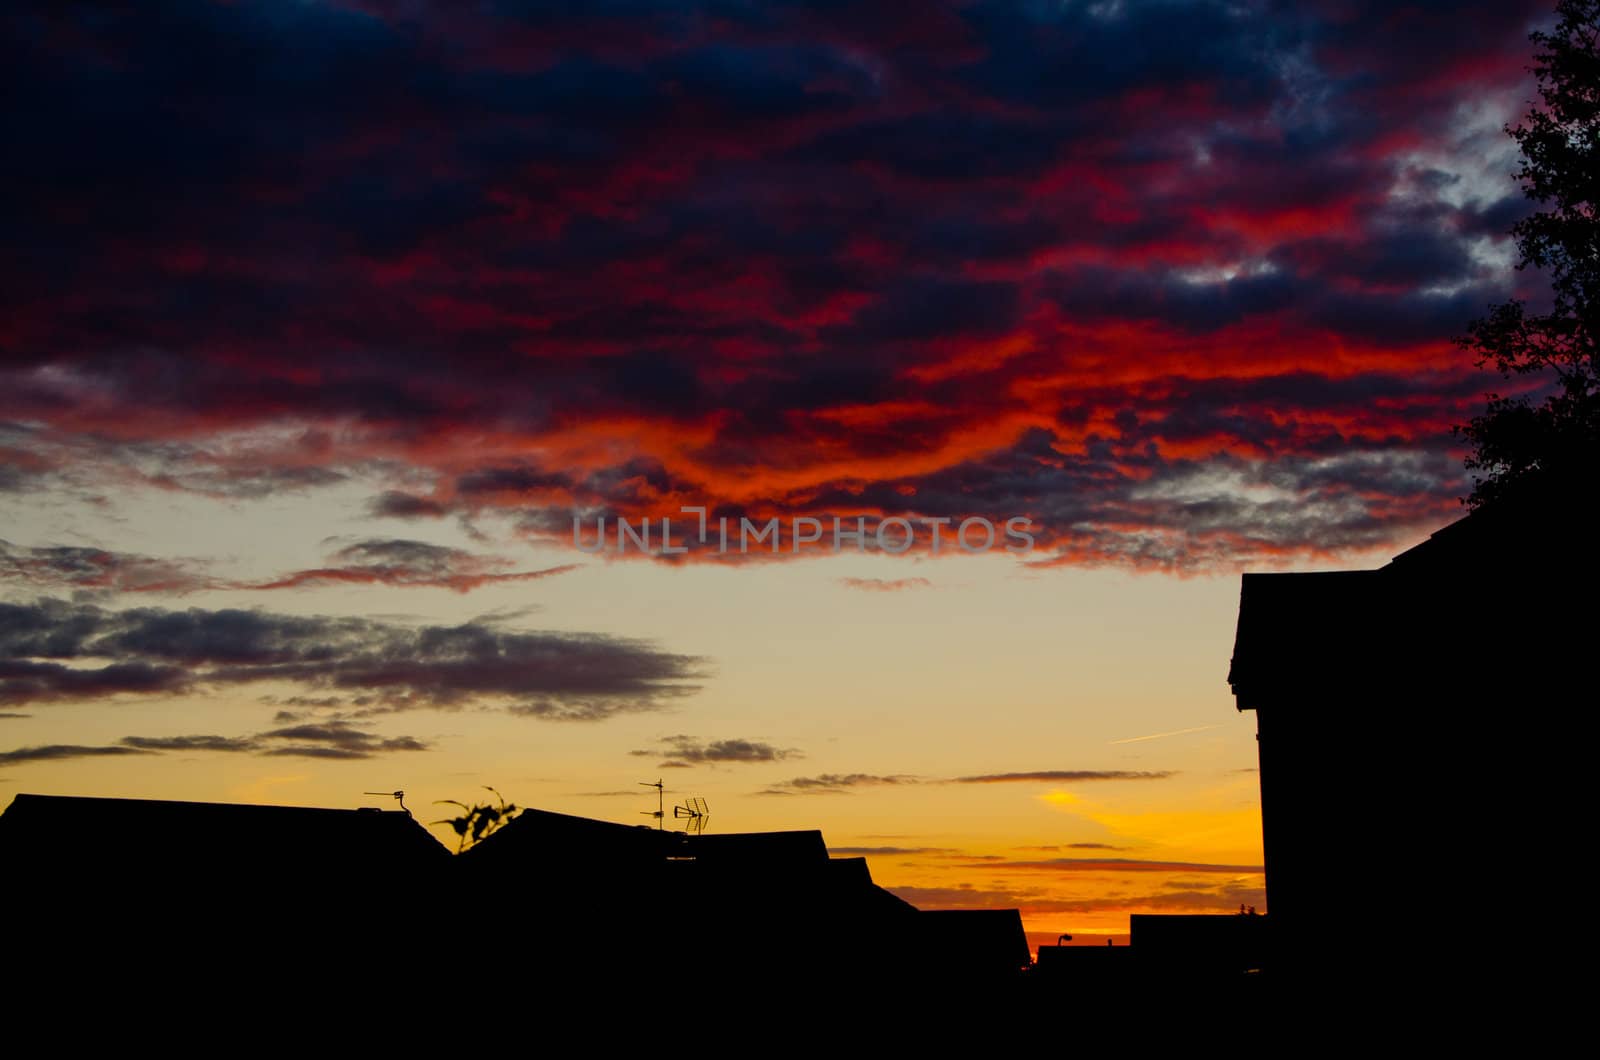 Picture of a sunset across rooftops